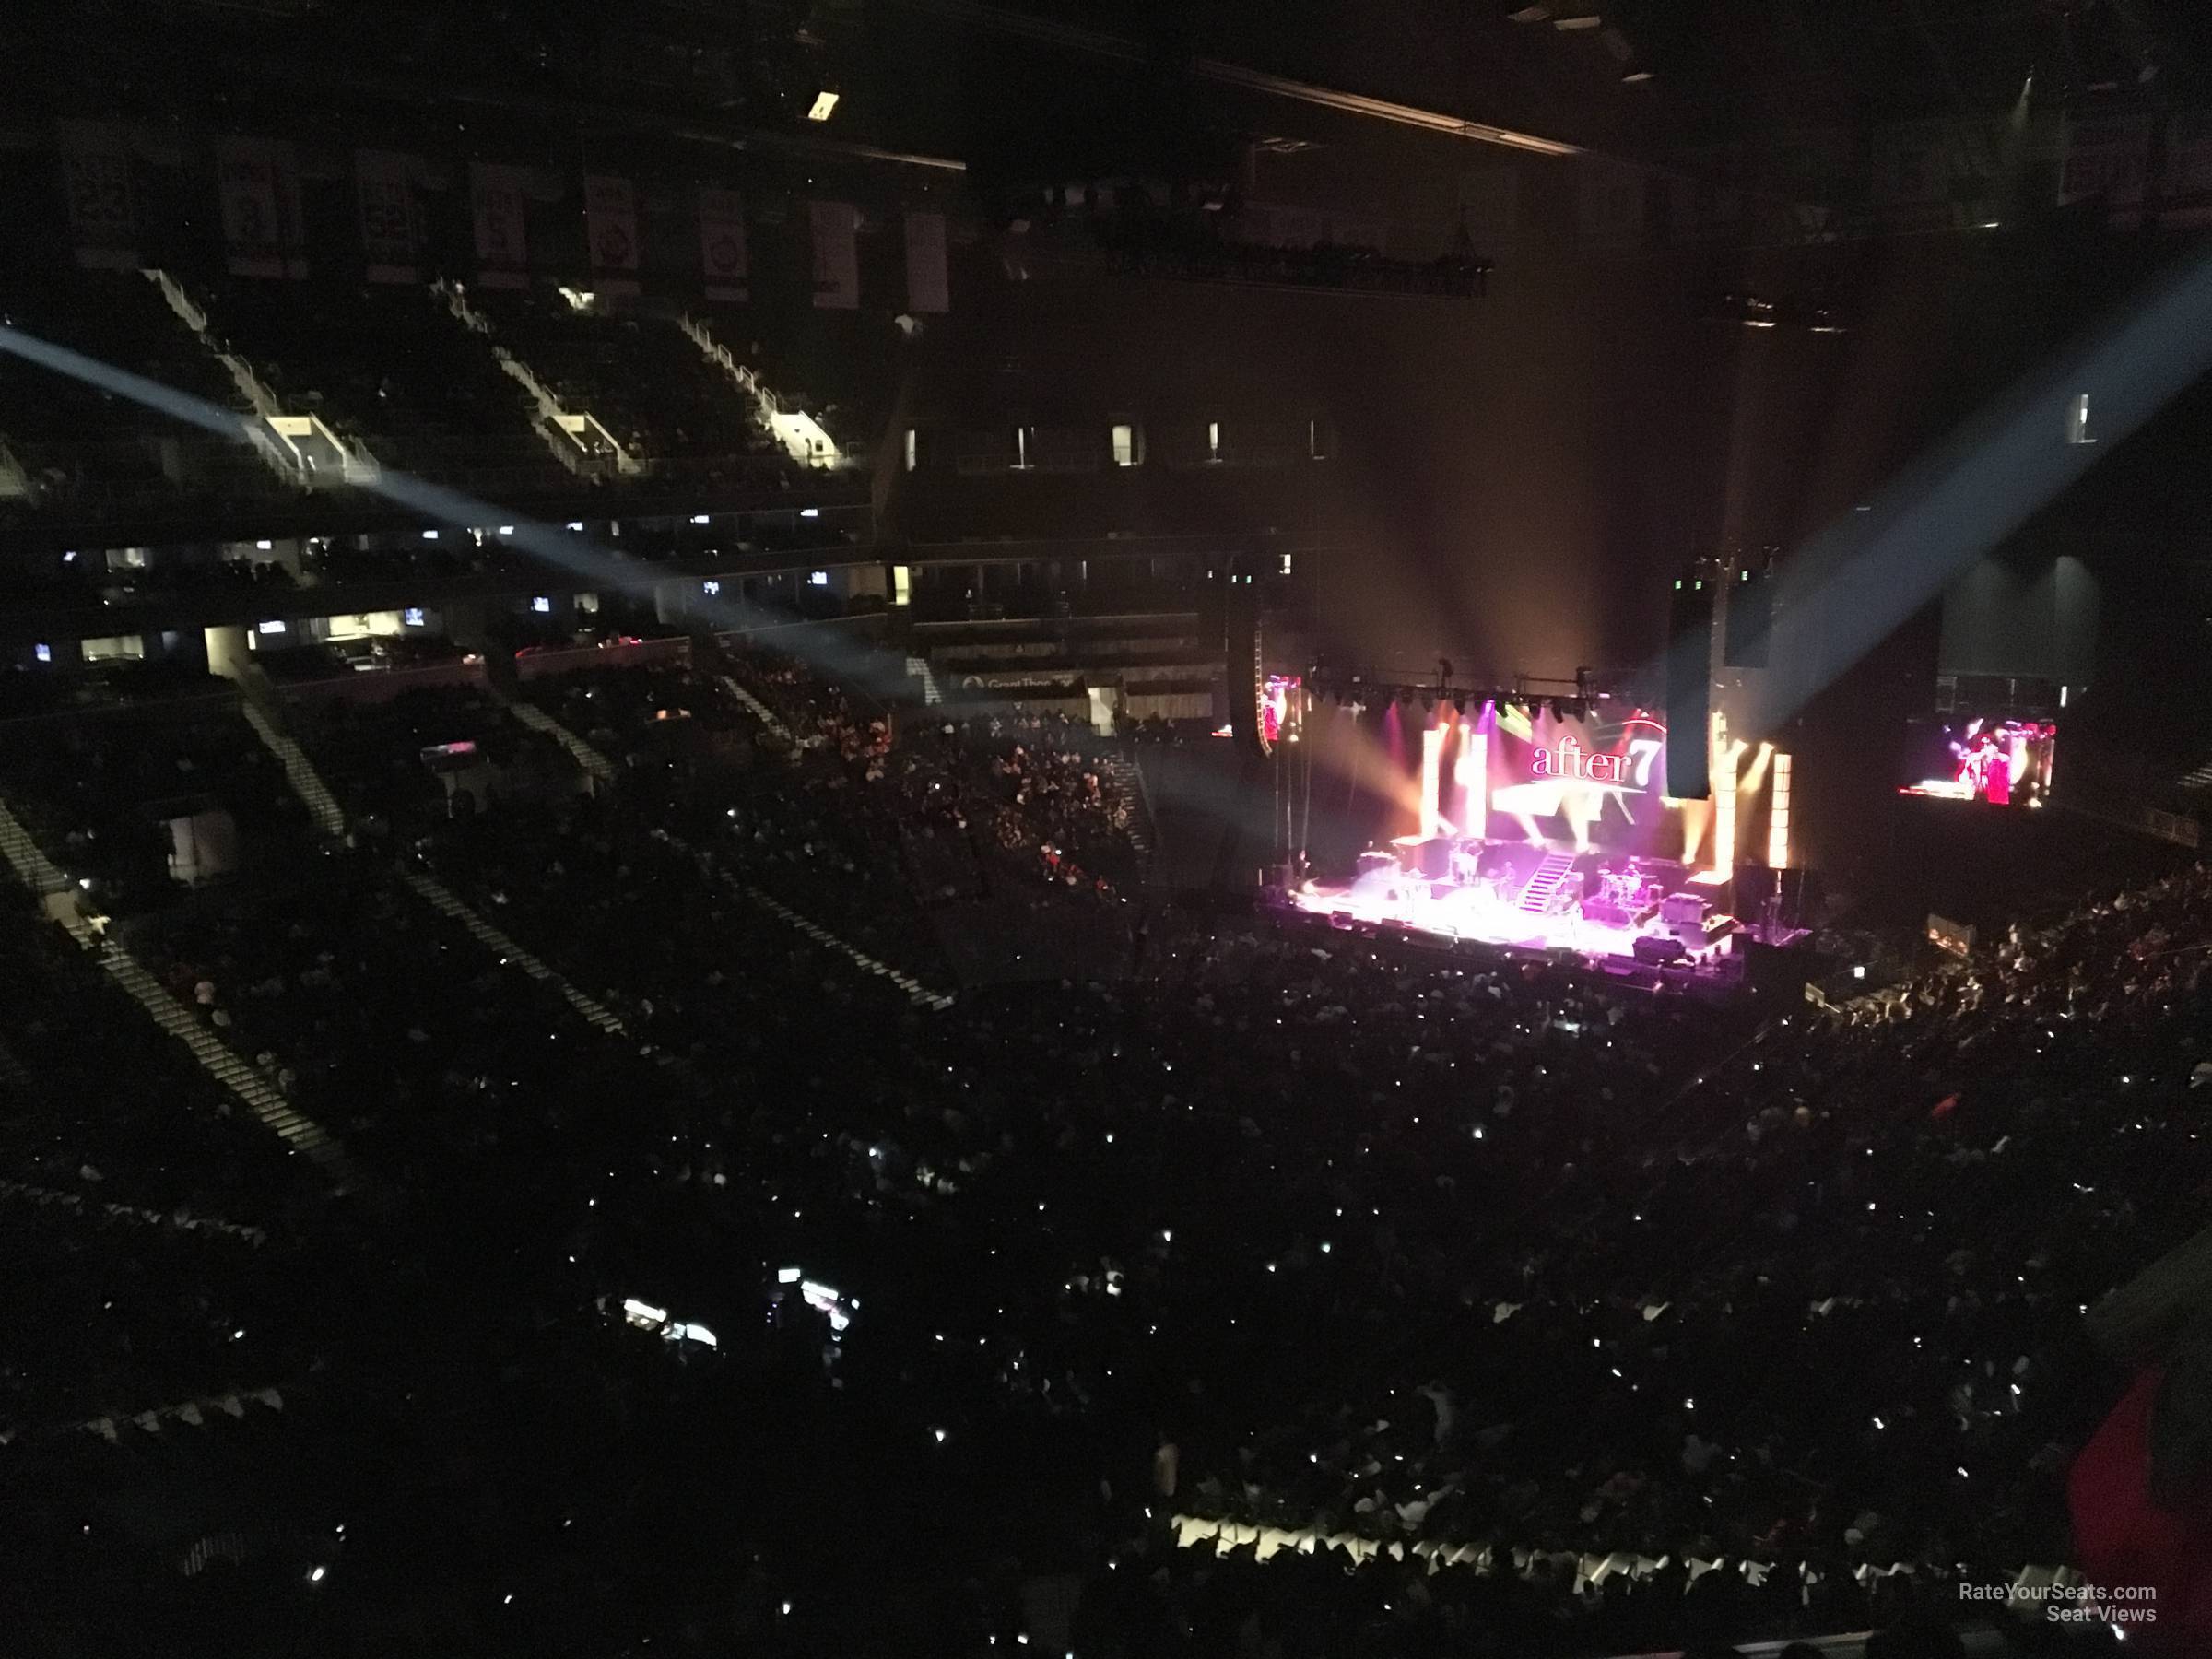 section 213, row 8 seat view  for concert - barclays center